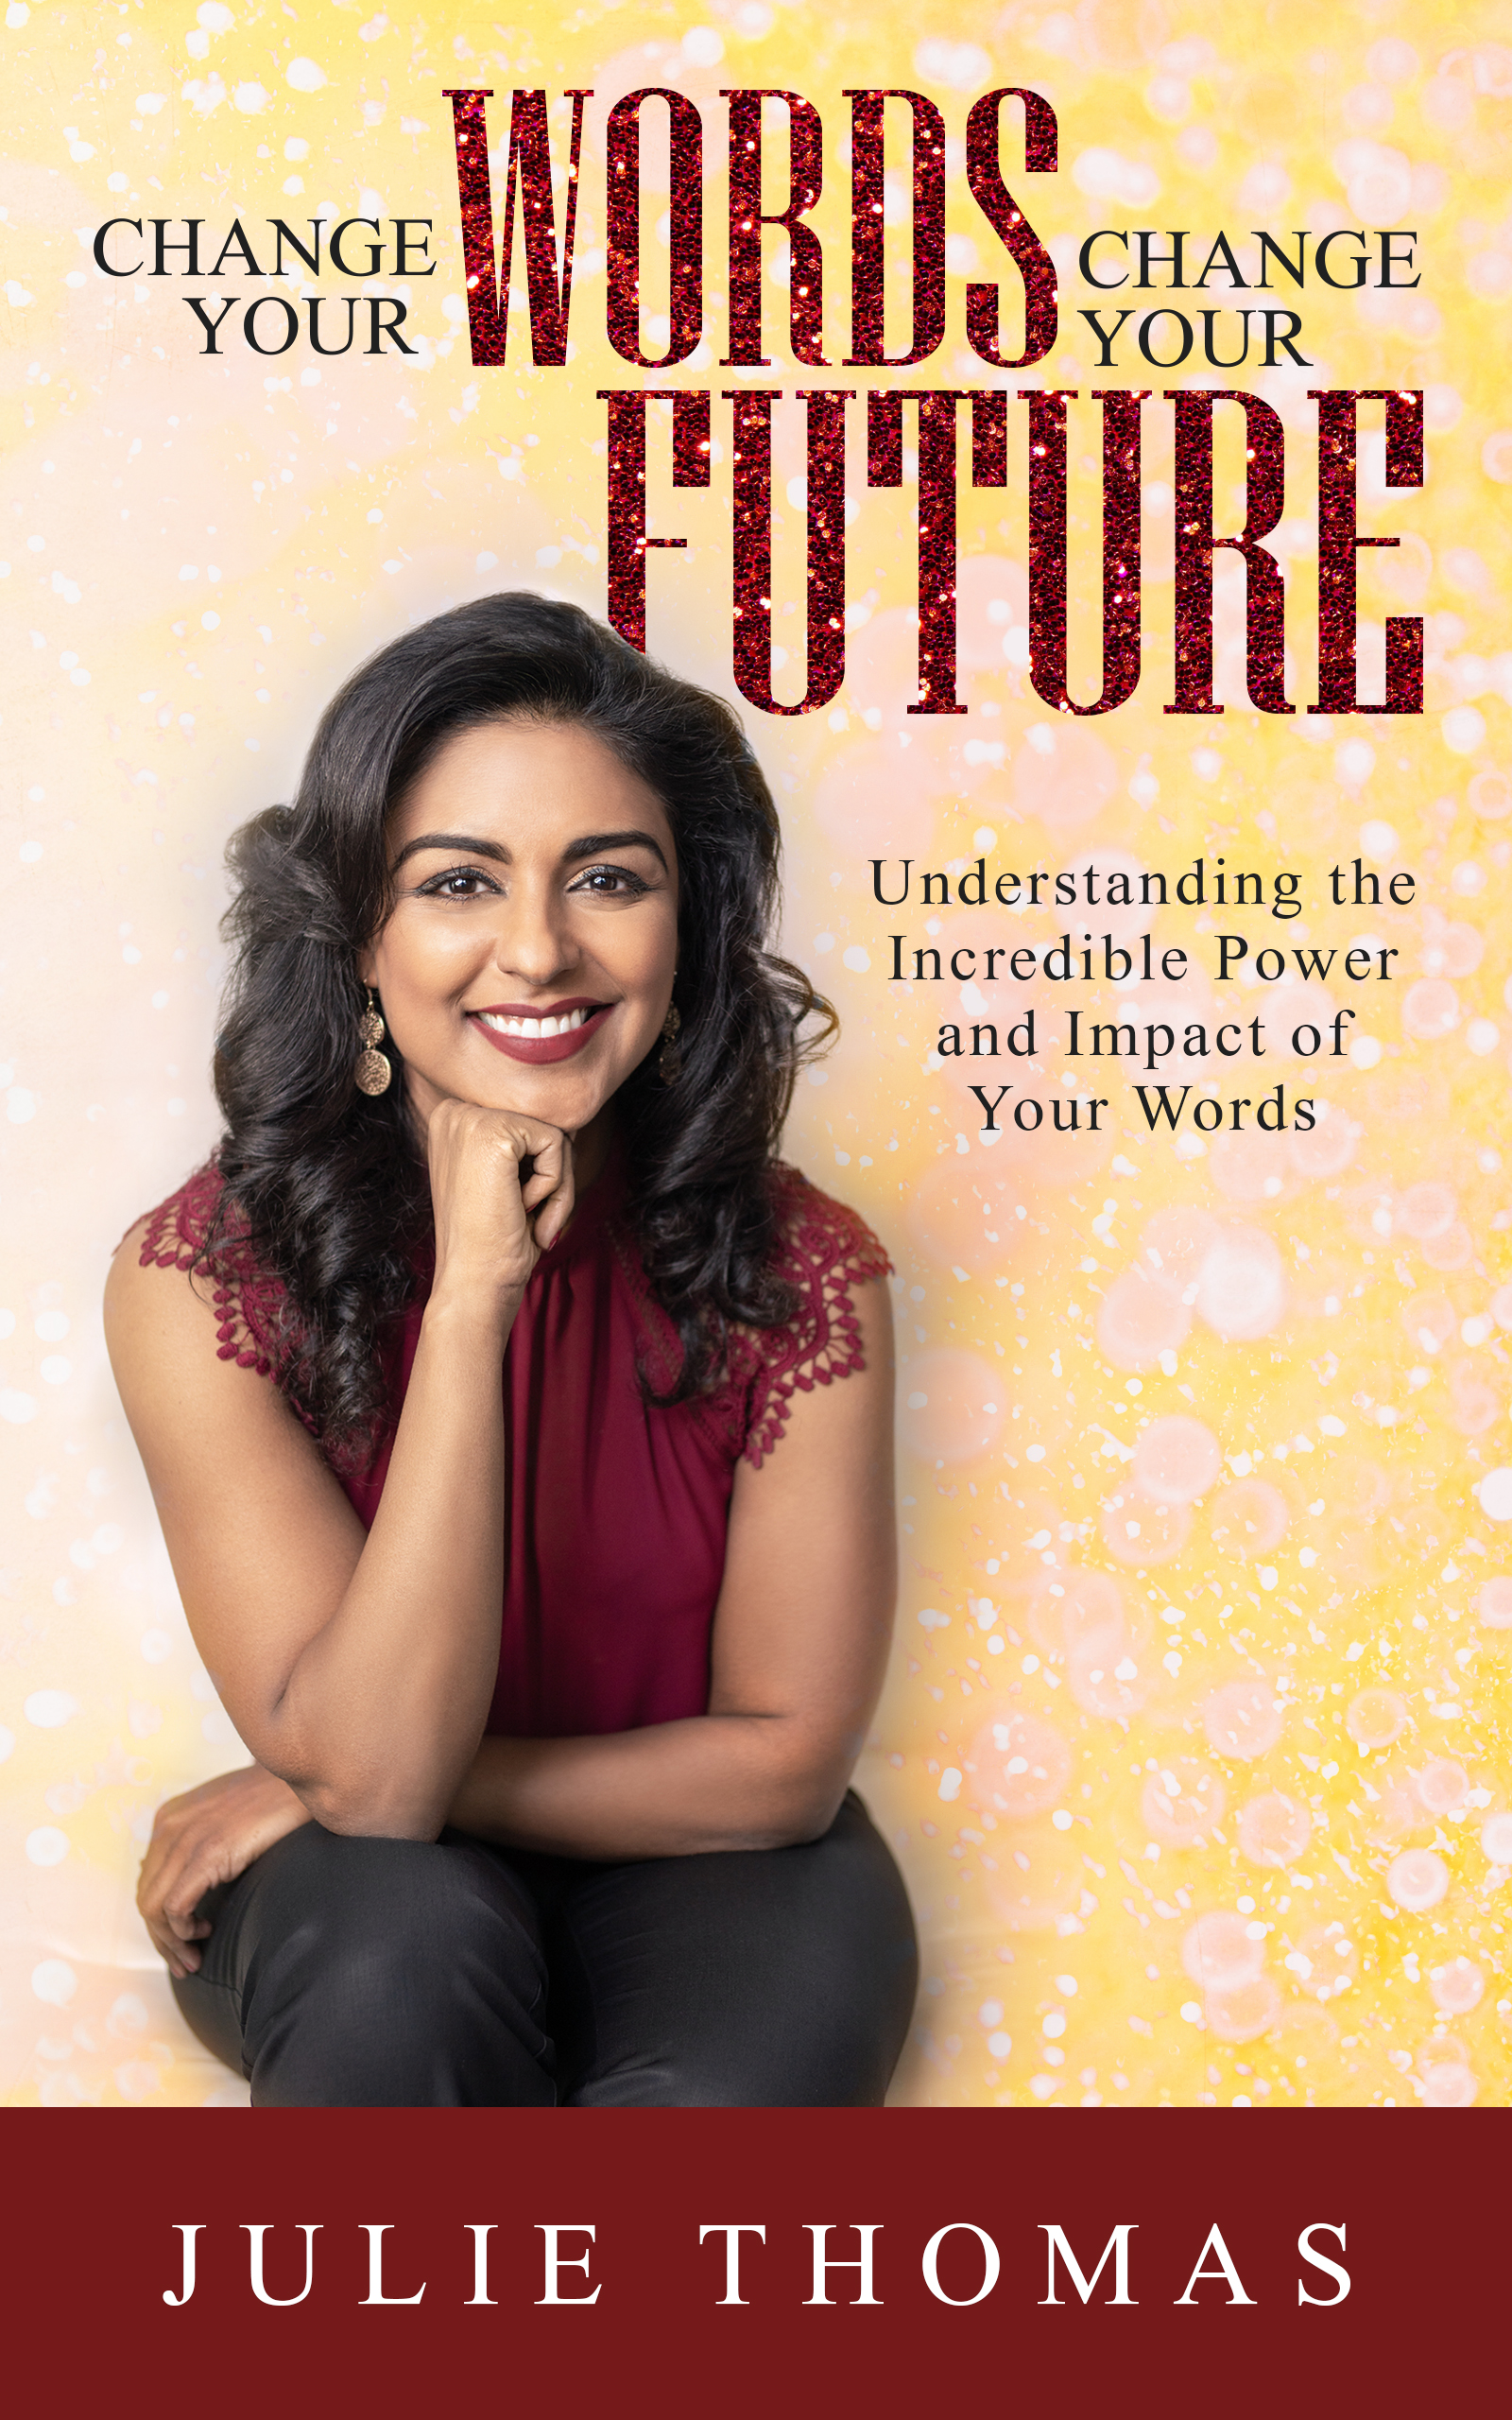 FREE: Change Your Words Change Your Future- Understanding the Incredible Power and Impact of Your Words by Julie Thomas by Julie Thomas